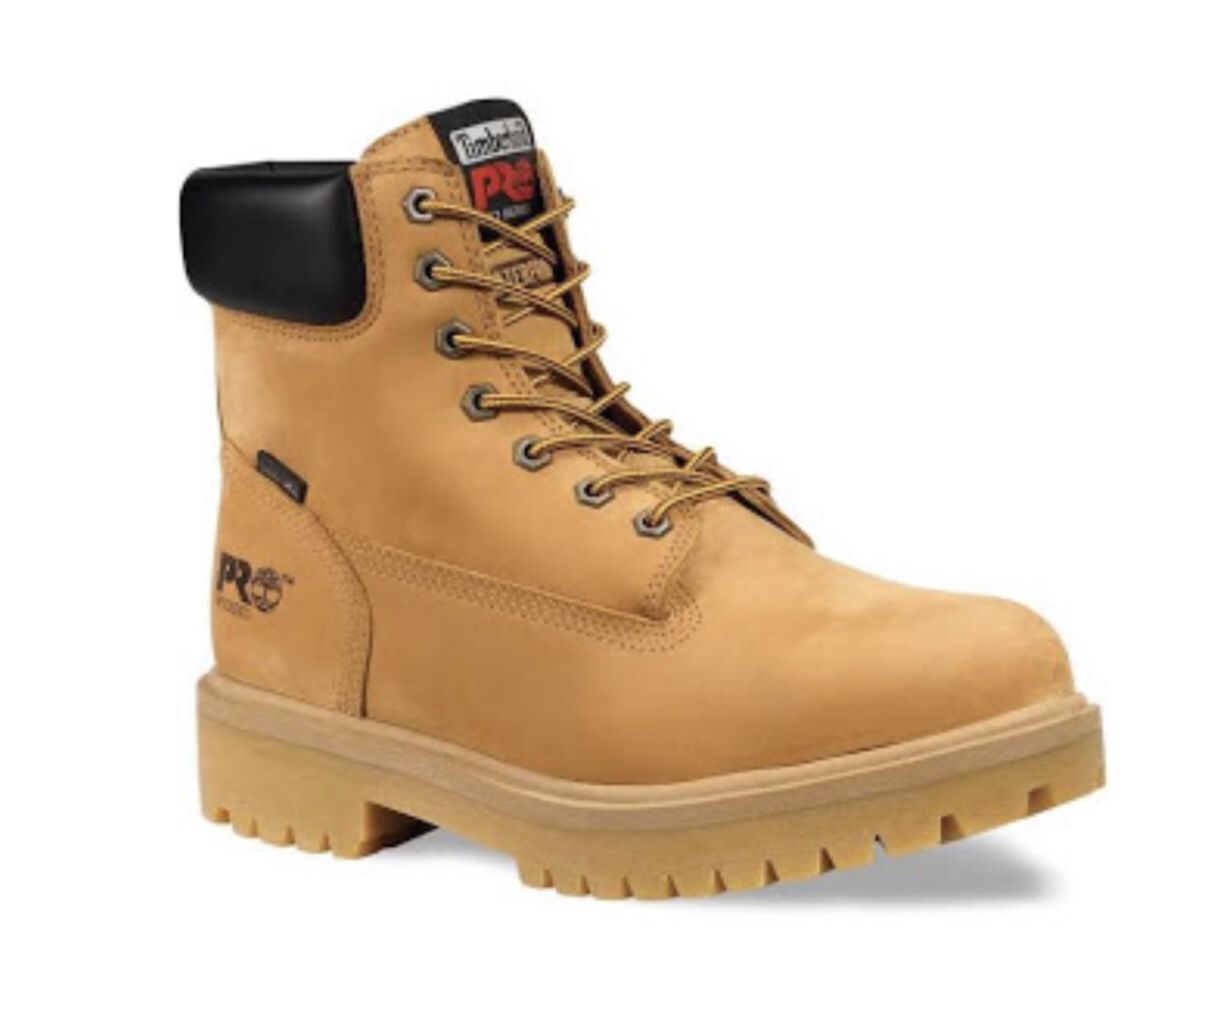 Timberland work steal toe boots (brand new)